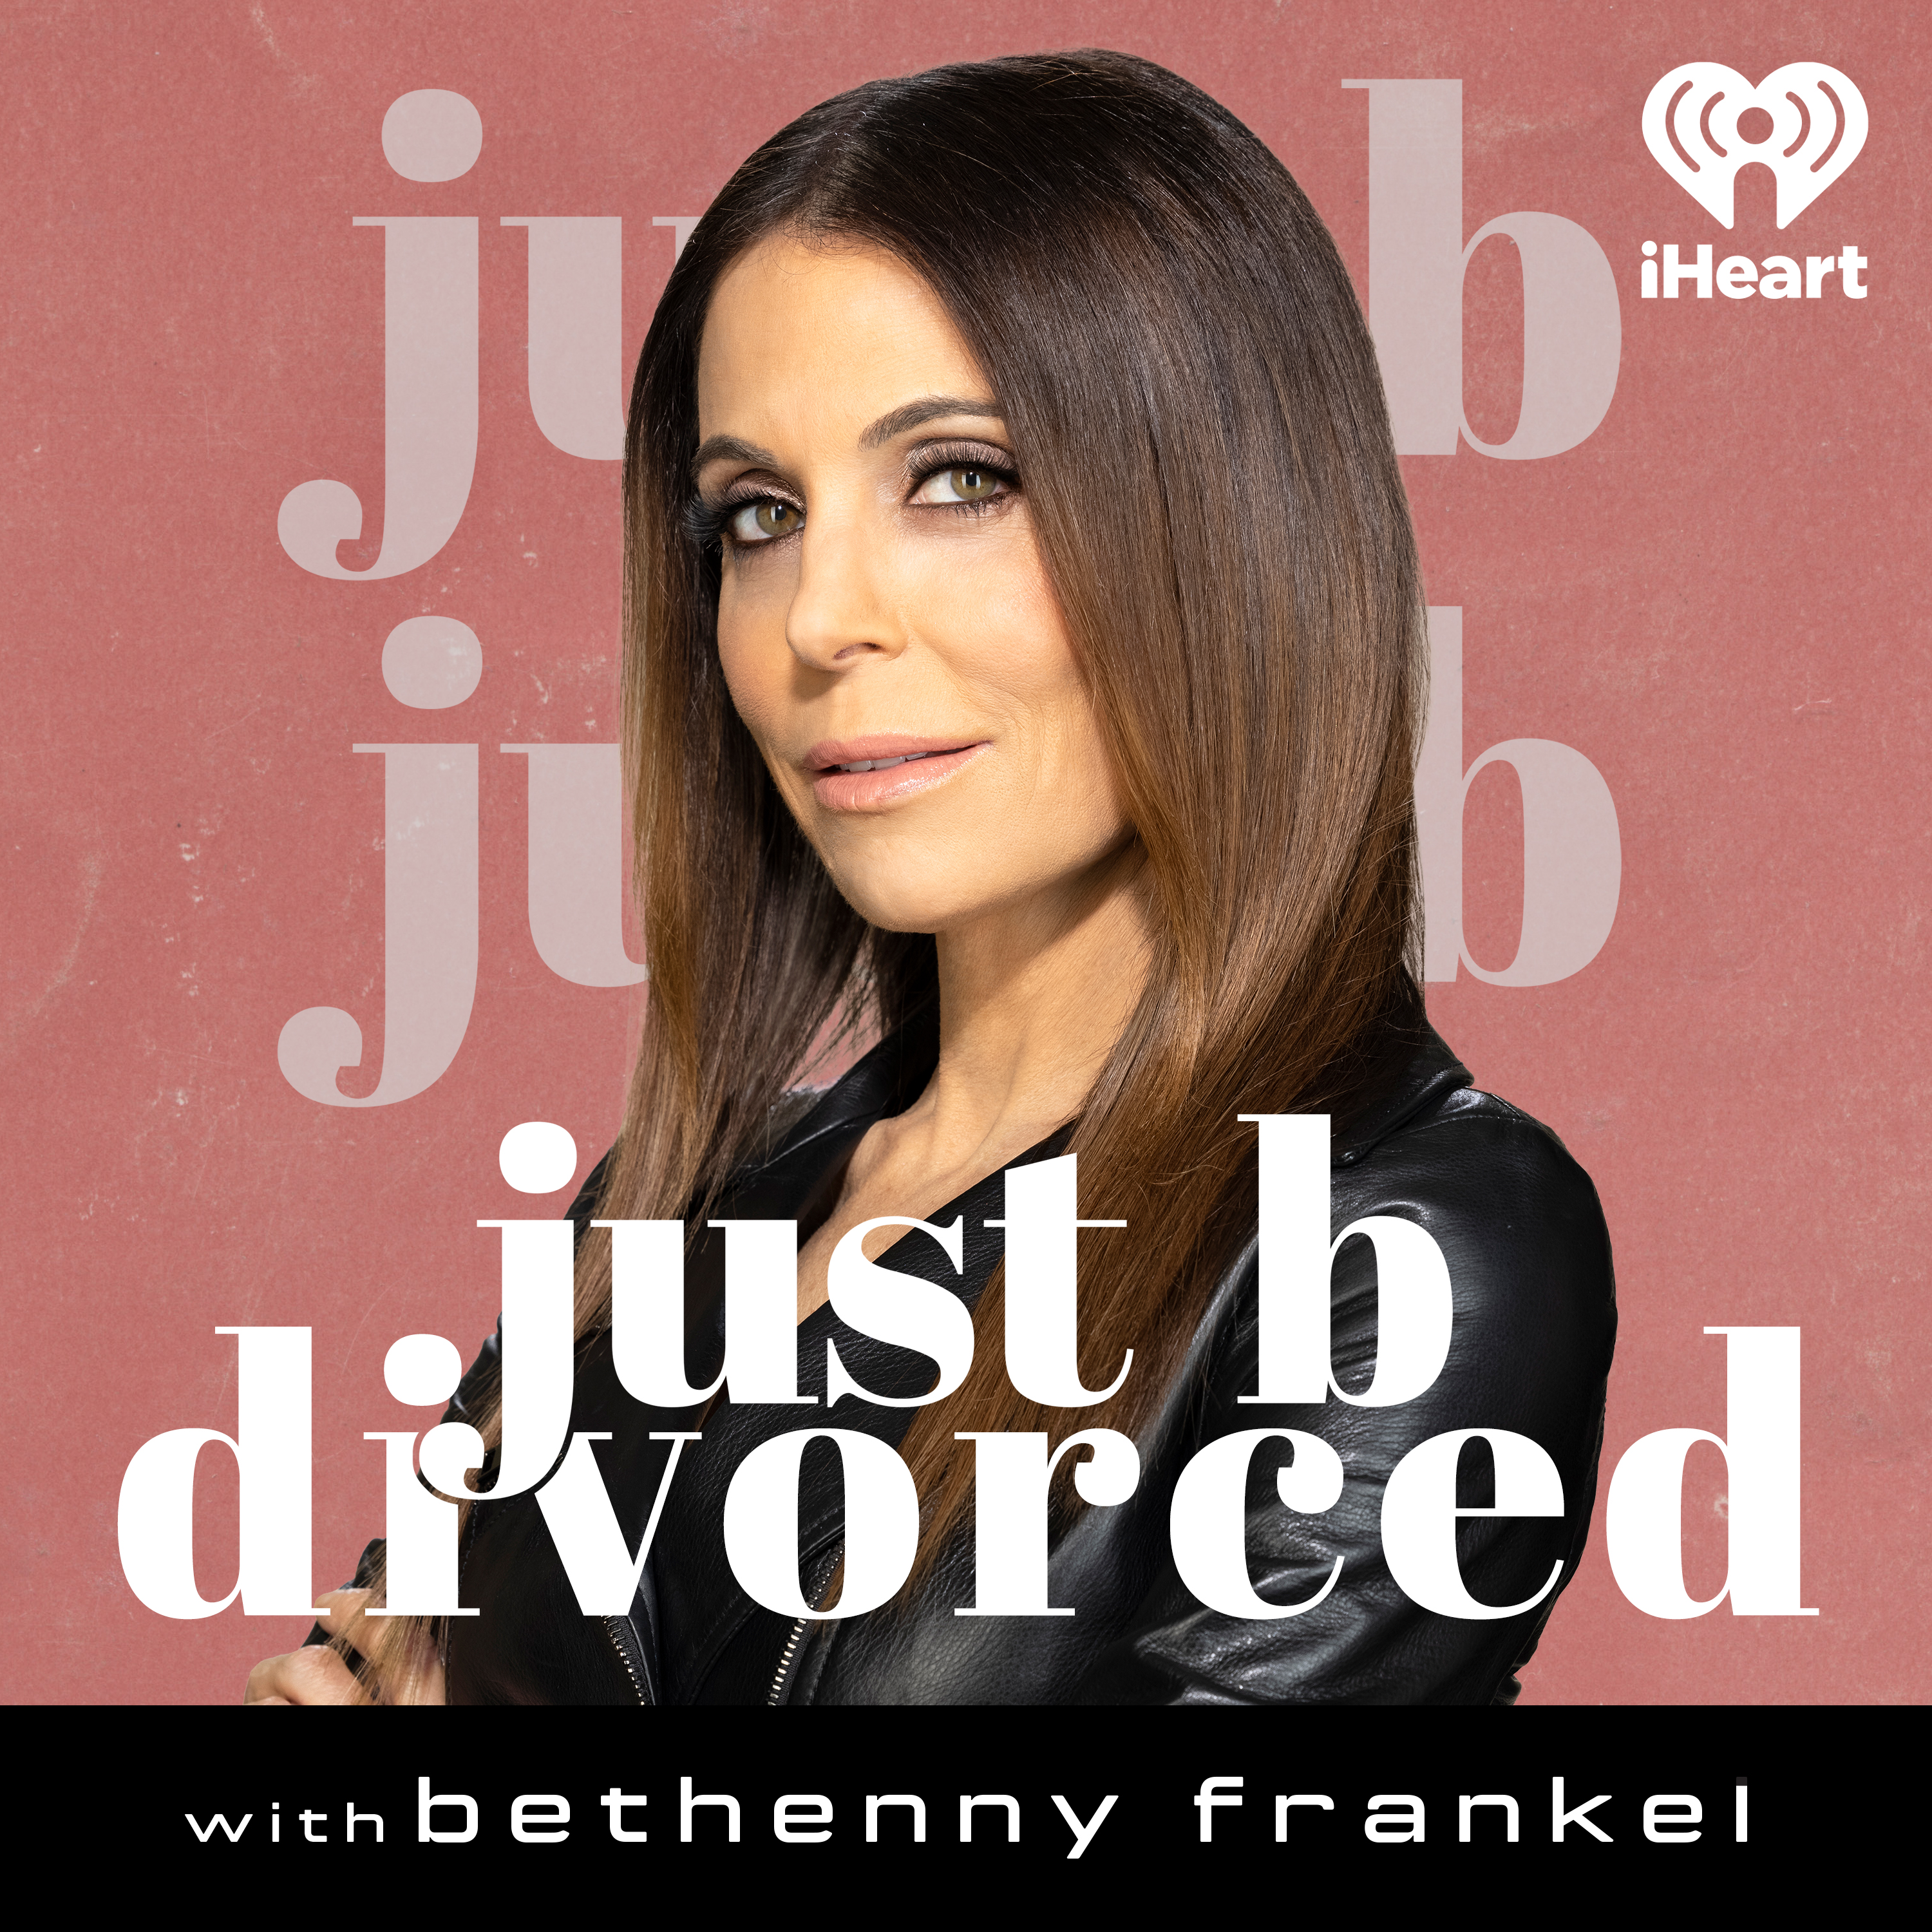 "We laughed, we cried, we sh*t” with Leslie Bibb by iHeartPodcasts